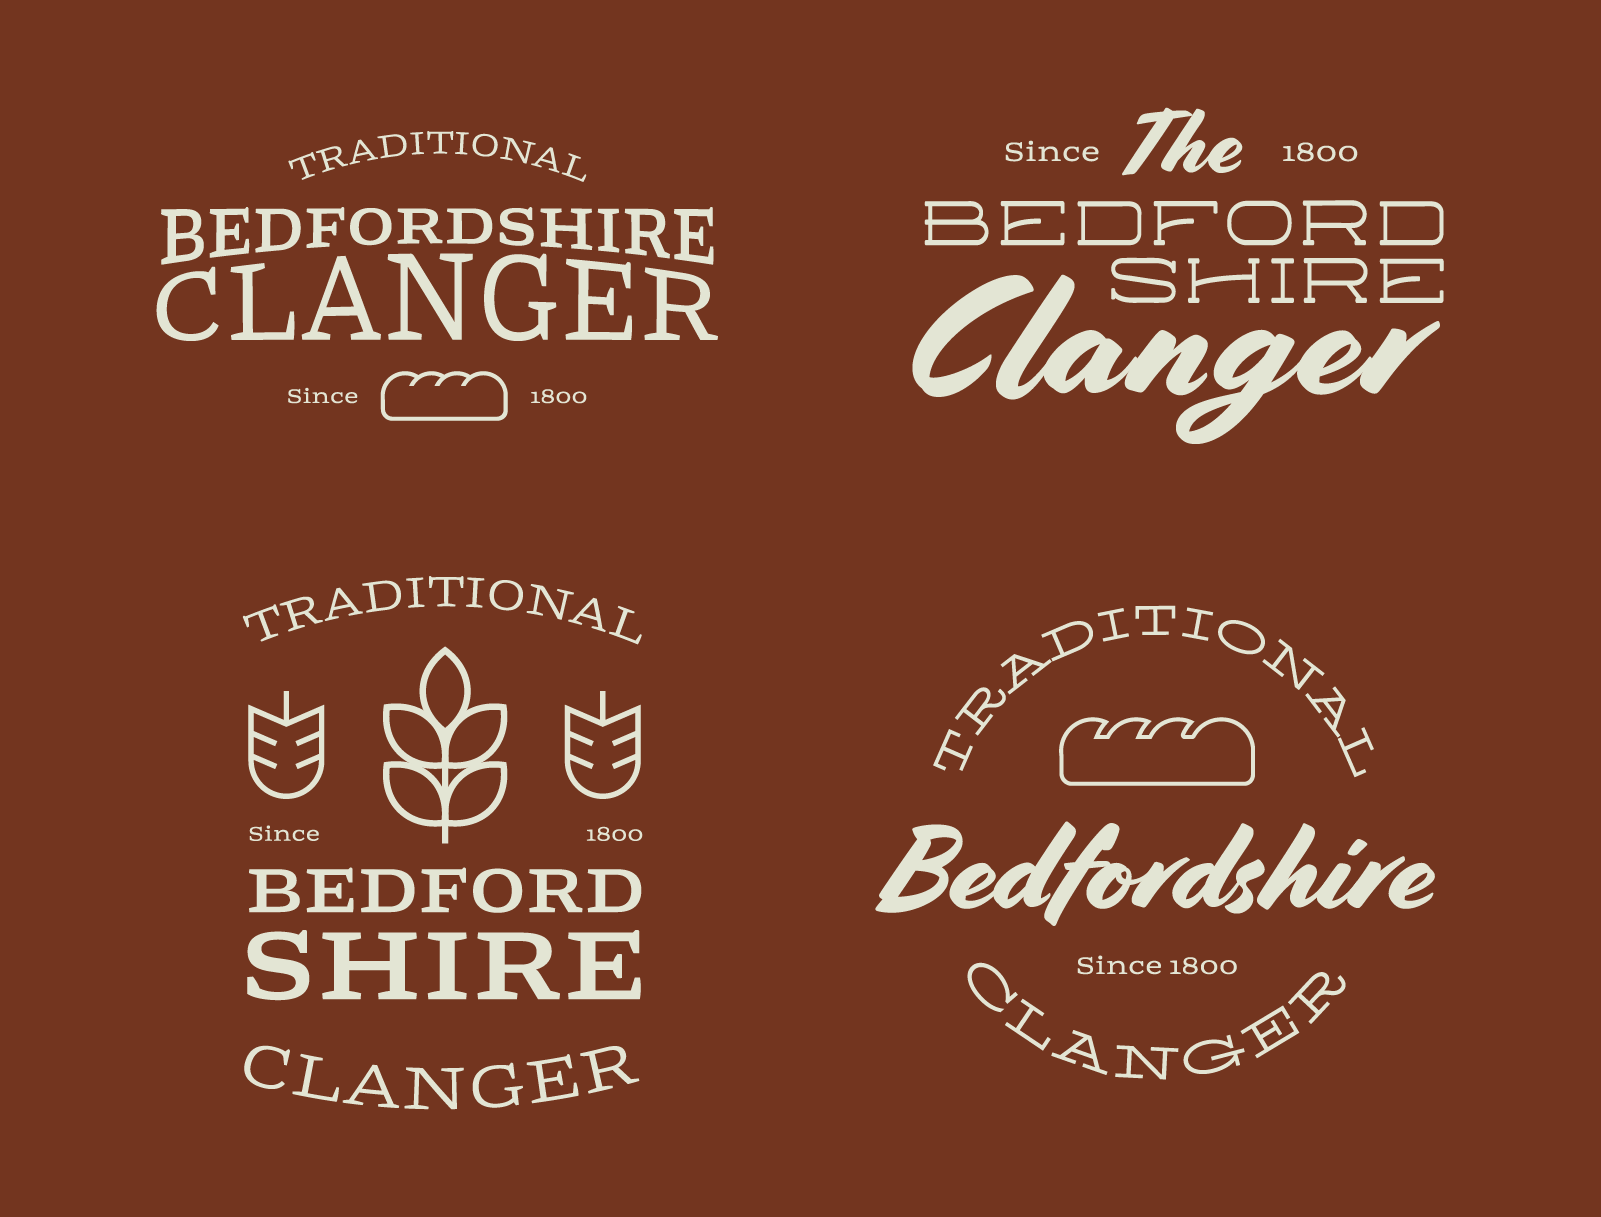 alt: Four variations of a logo for a Bedfordshire Clanger. The logos all have a variation of the same phrase - Traditional Bedfordshire Clanger, Since 1800.